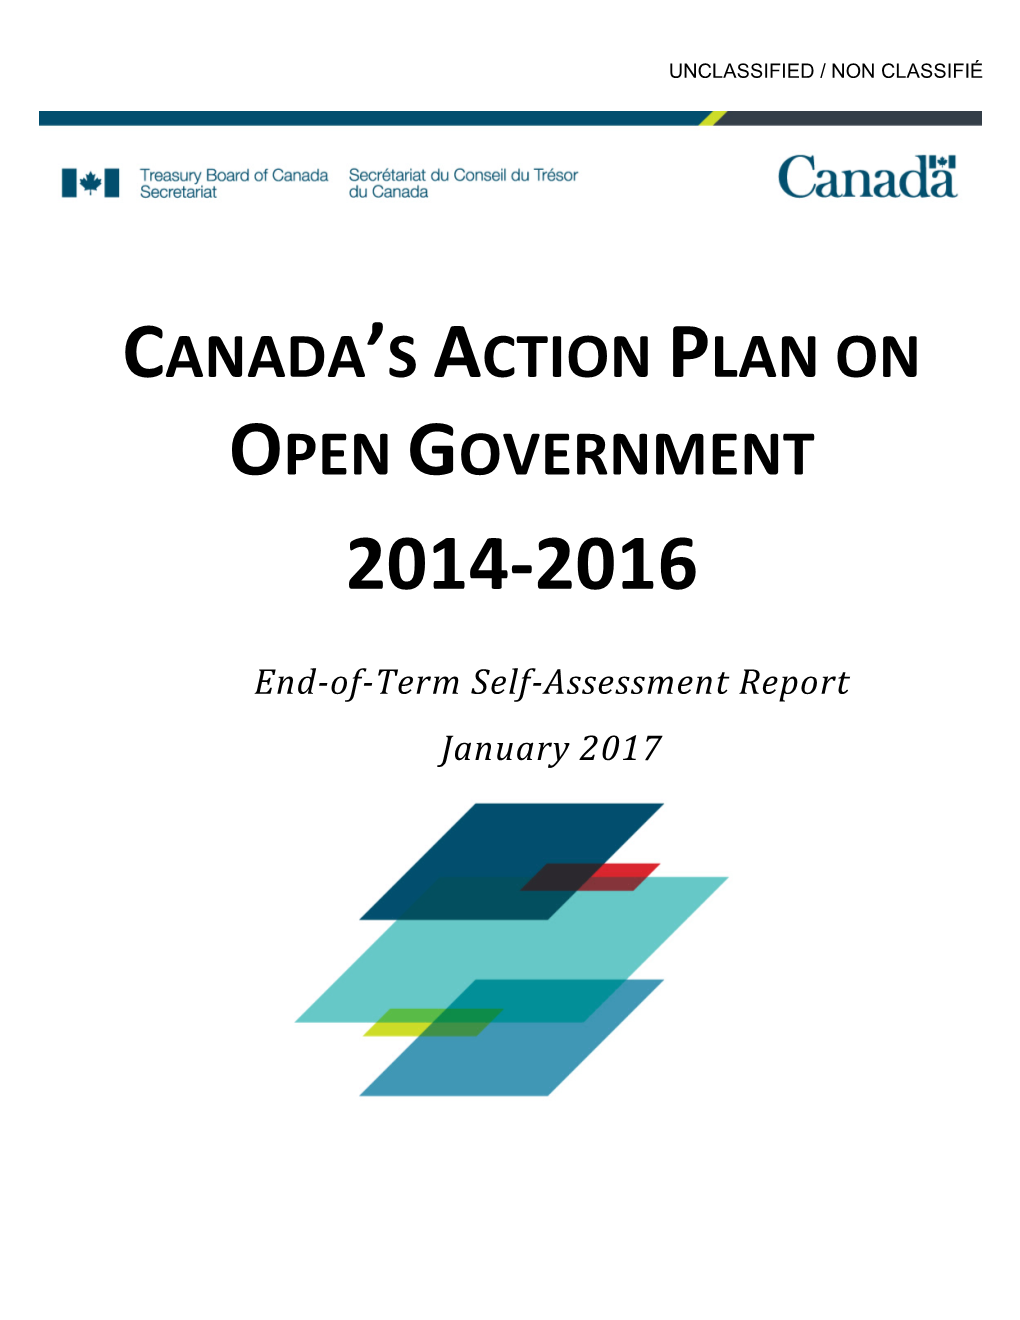 Canada's Action Plan on Open Government 2014-16, Canada’S Second Open Government Plan to the Open Government Partnership (OGP)